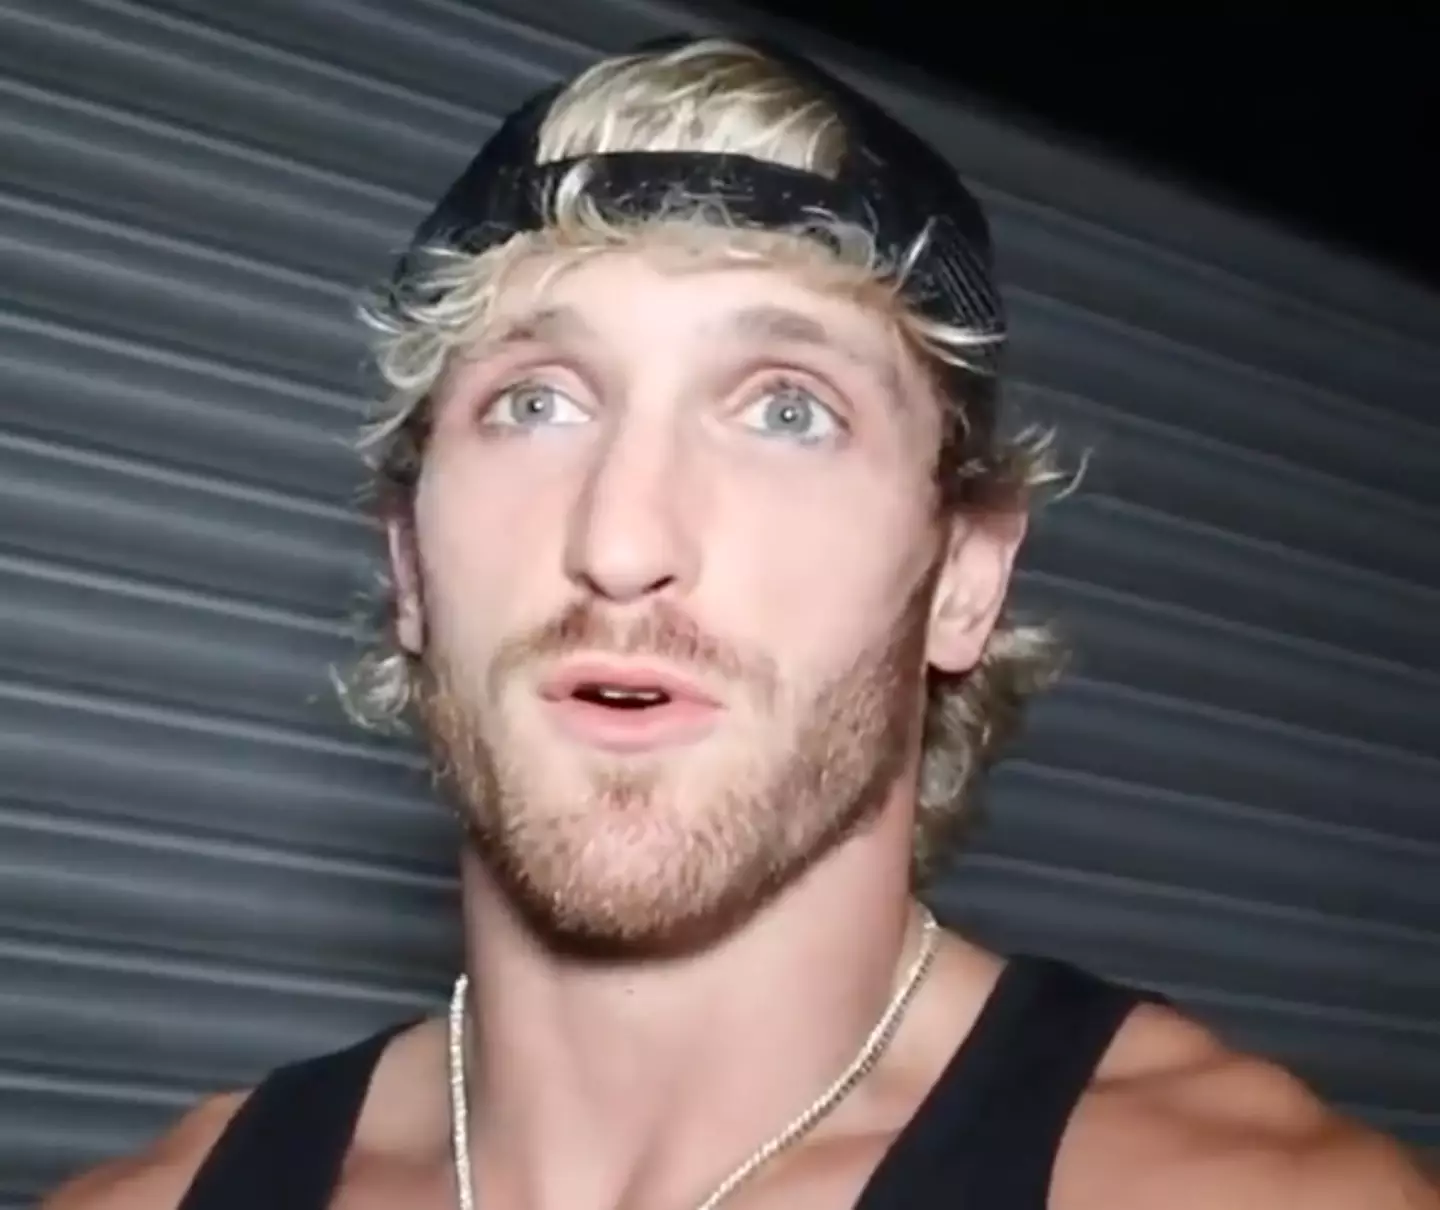 Logan Paul responded to the cruel comments in the days following the Dillon Danis' tweets.